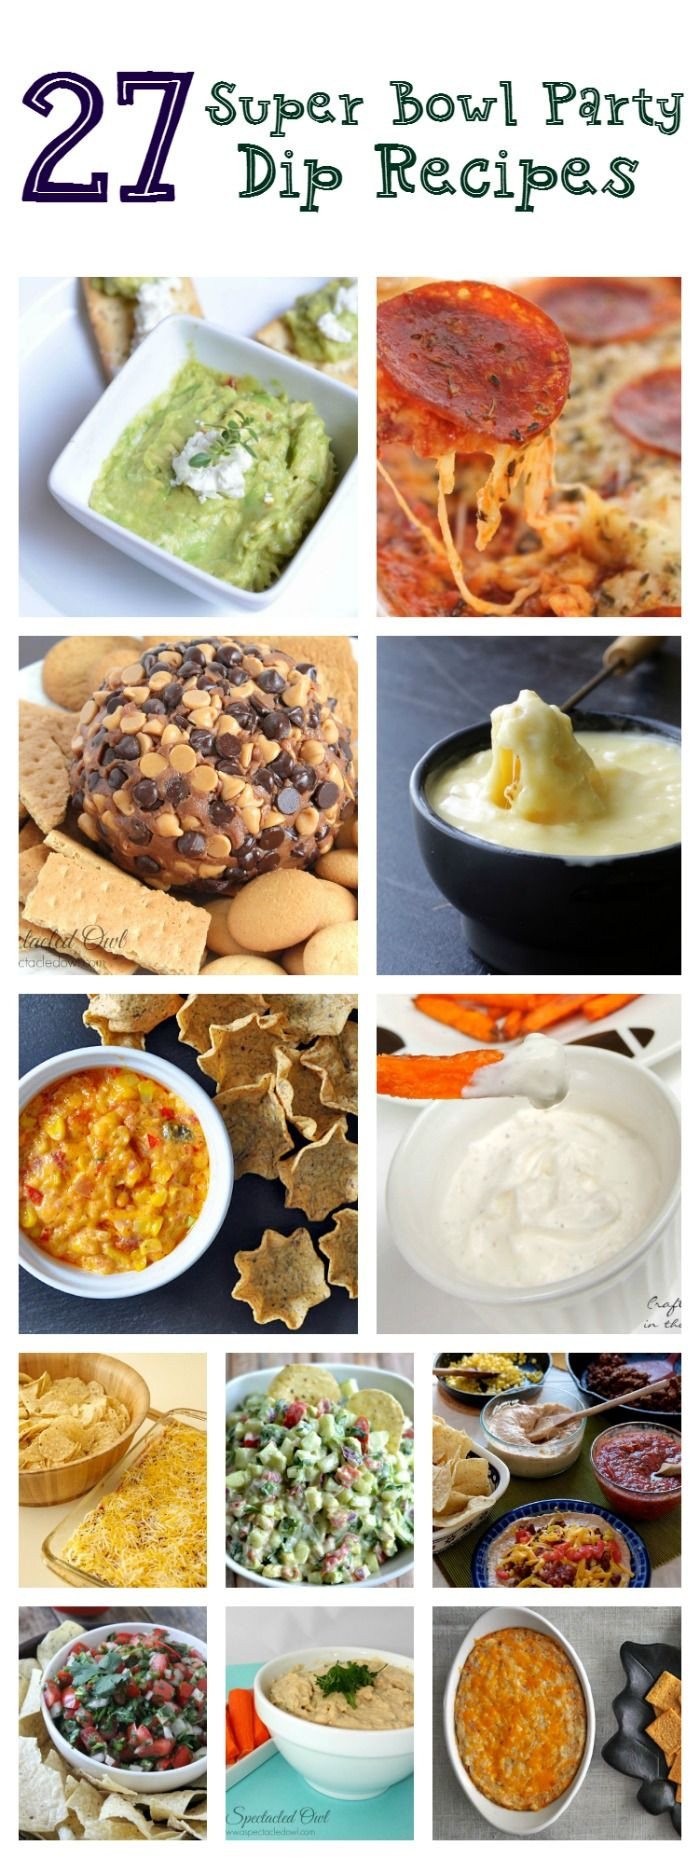 Super Bowl Party Dips Recipes
 27 of the Best Super Bowl Party Dip Recipes Ever